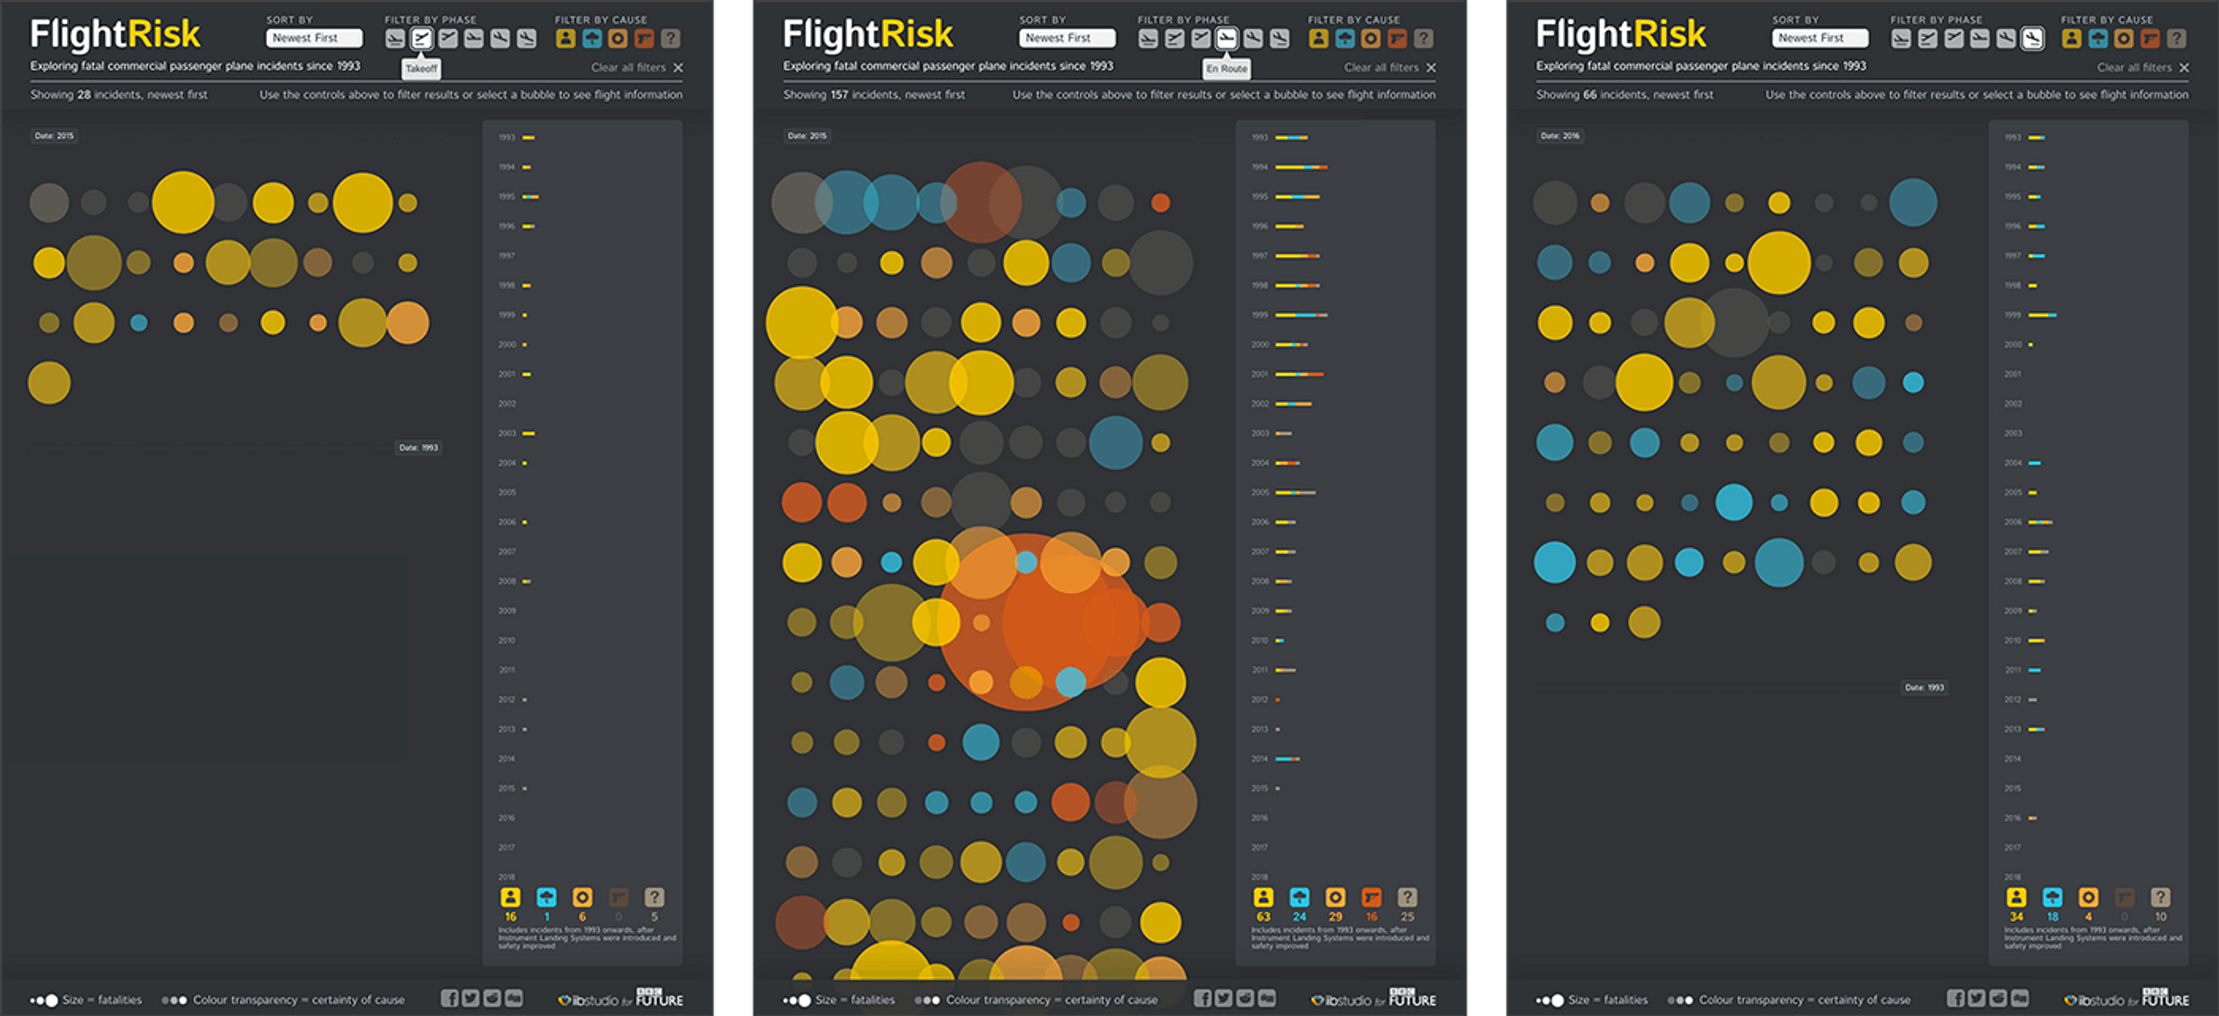 Three screenshots of the bubbles used on the Flight Risk website. The three screenshots show the page with different filters applied.